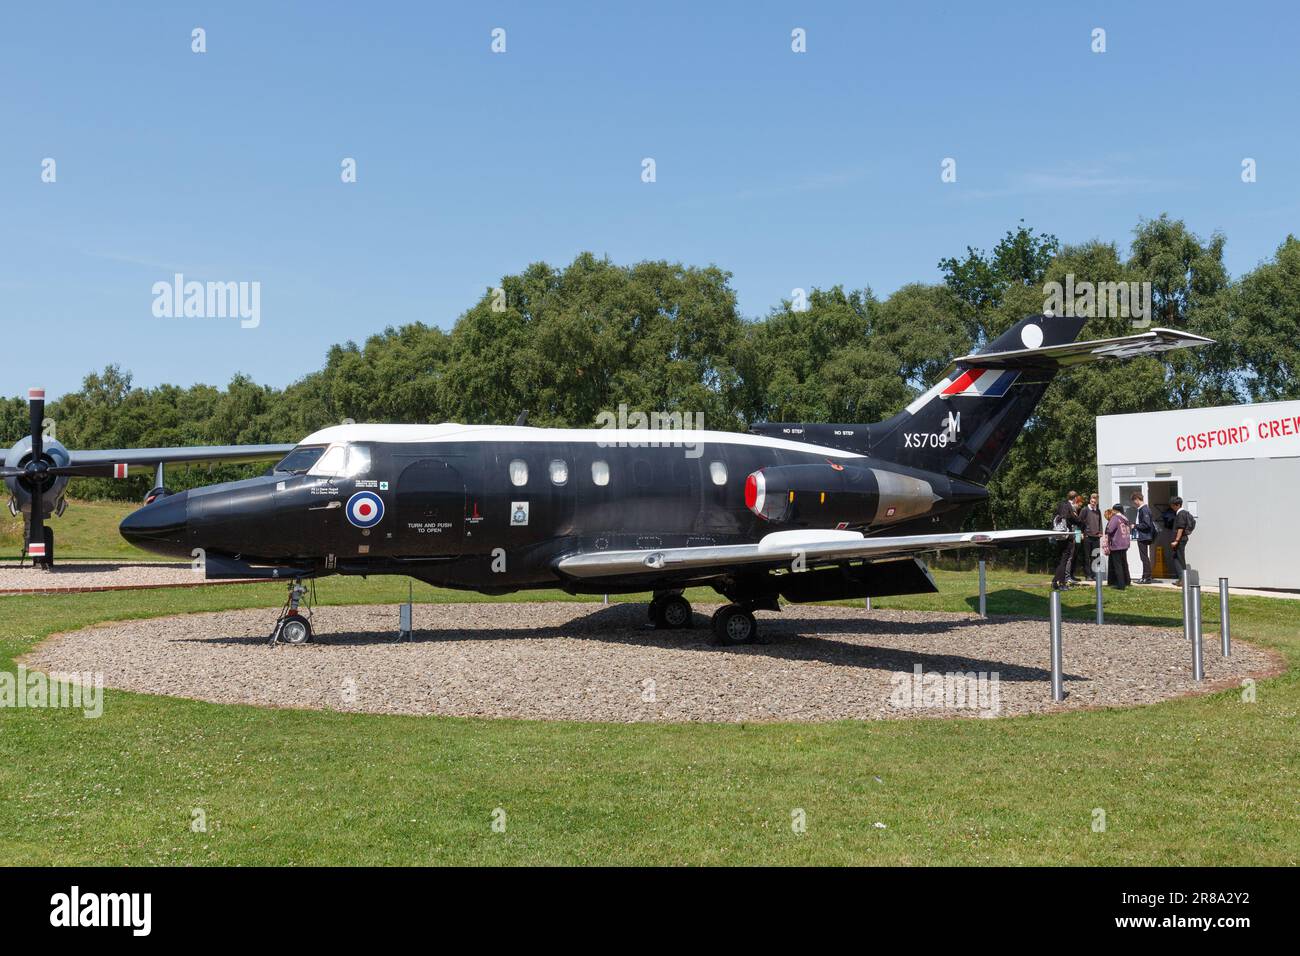 A Hawker Siddeley Dominie at the Cosford RAF museum Stock Photo